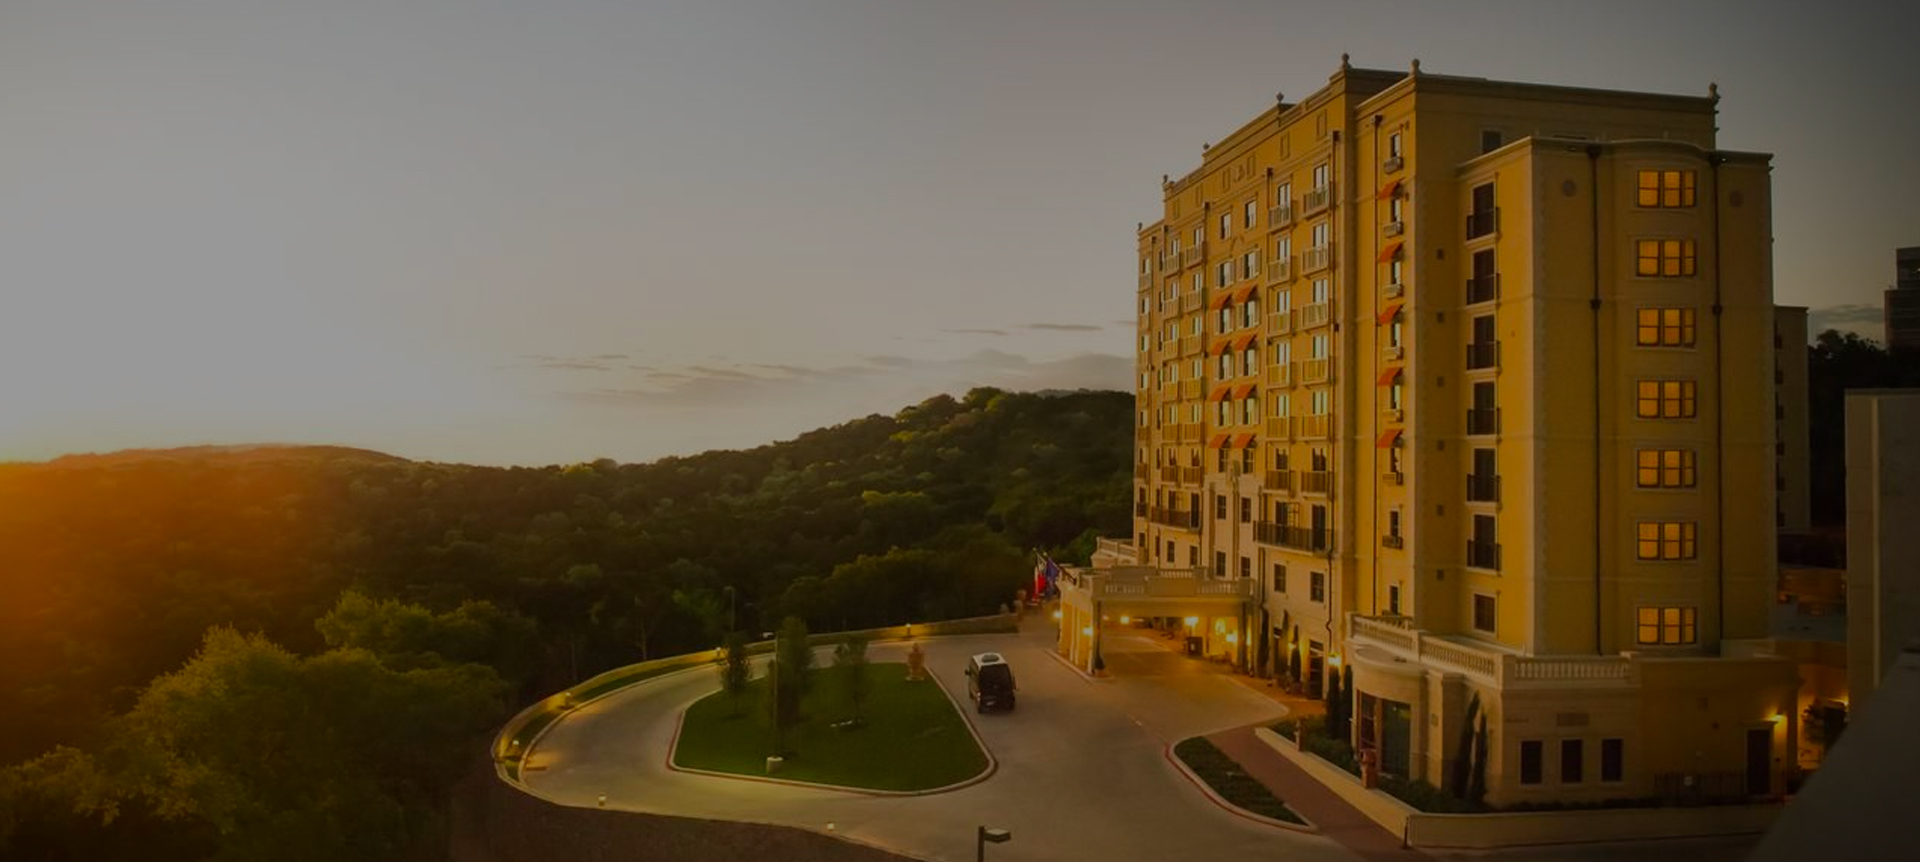 exterior view of hotel viata at sunset